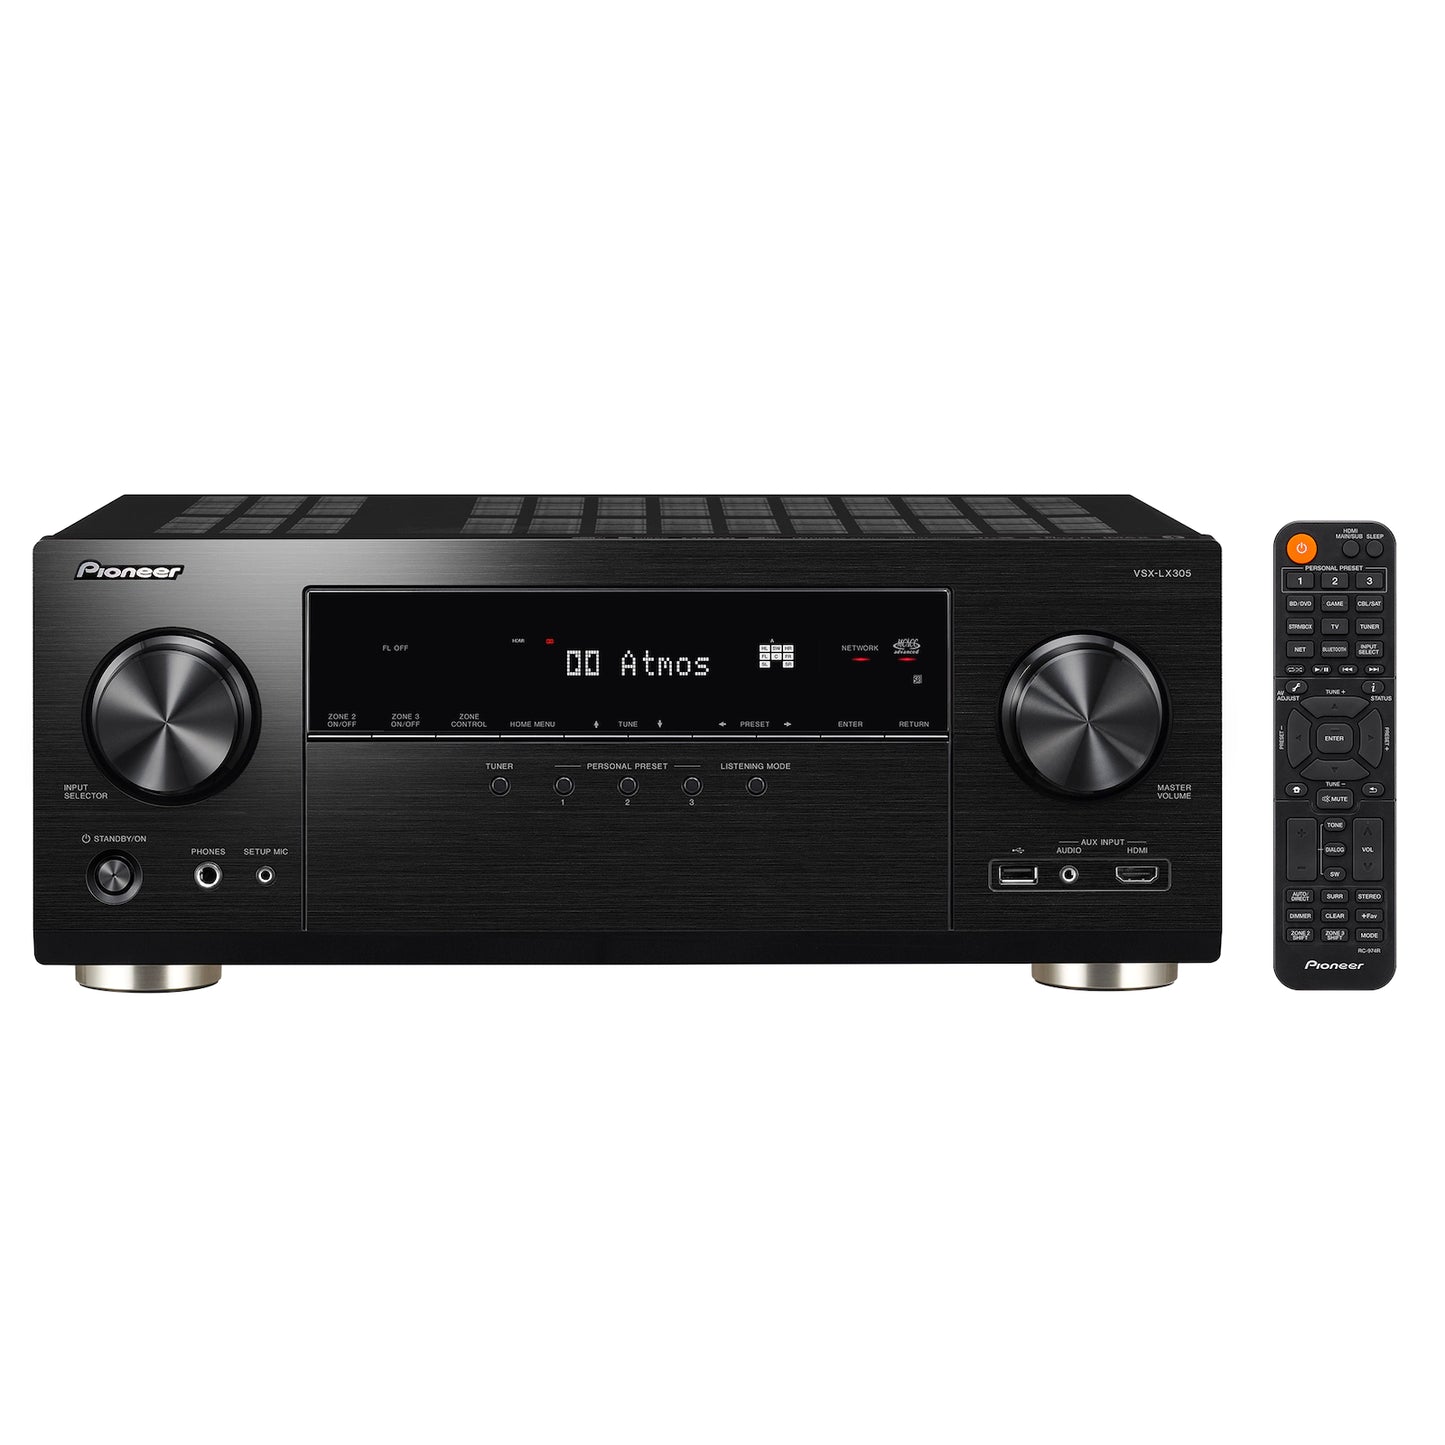 Pioneer Elite VSX-LX305 9.2-channel Home Theater Receiver with Dolby Atmos® - Black